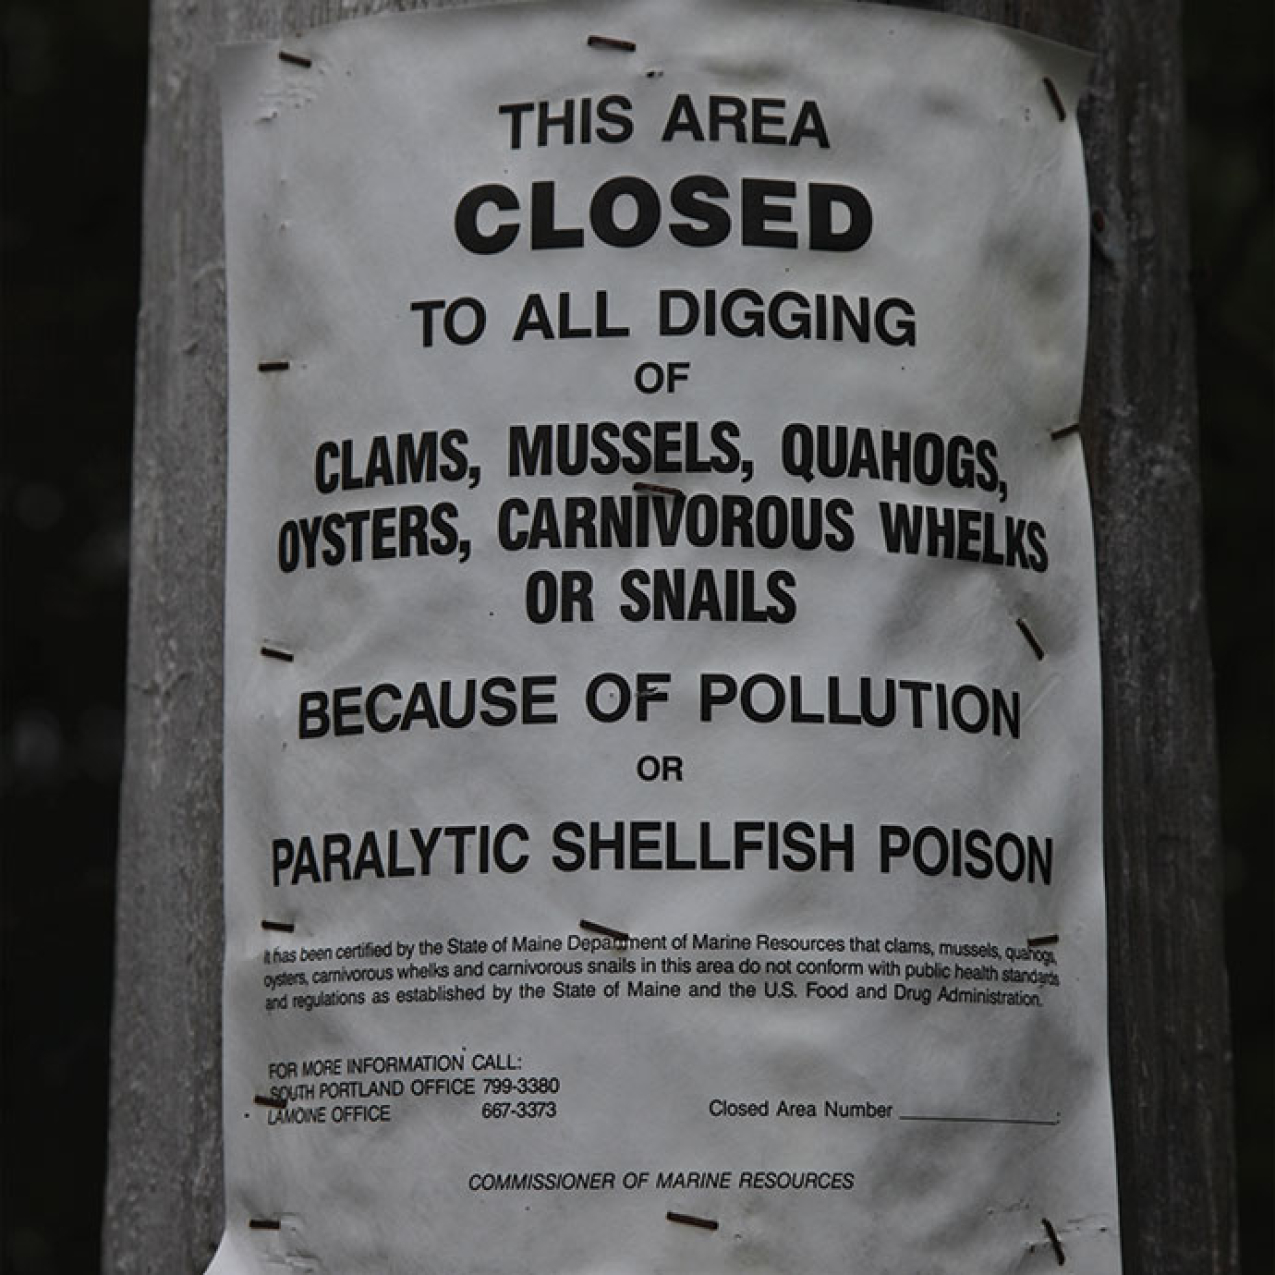 Public warning signs appear in areas that have been closed due to high levels of toxin in shellfish.